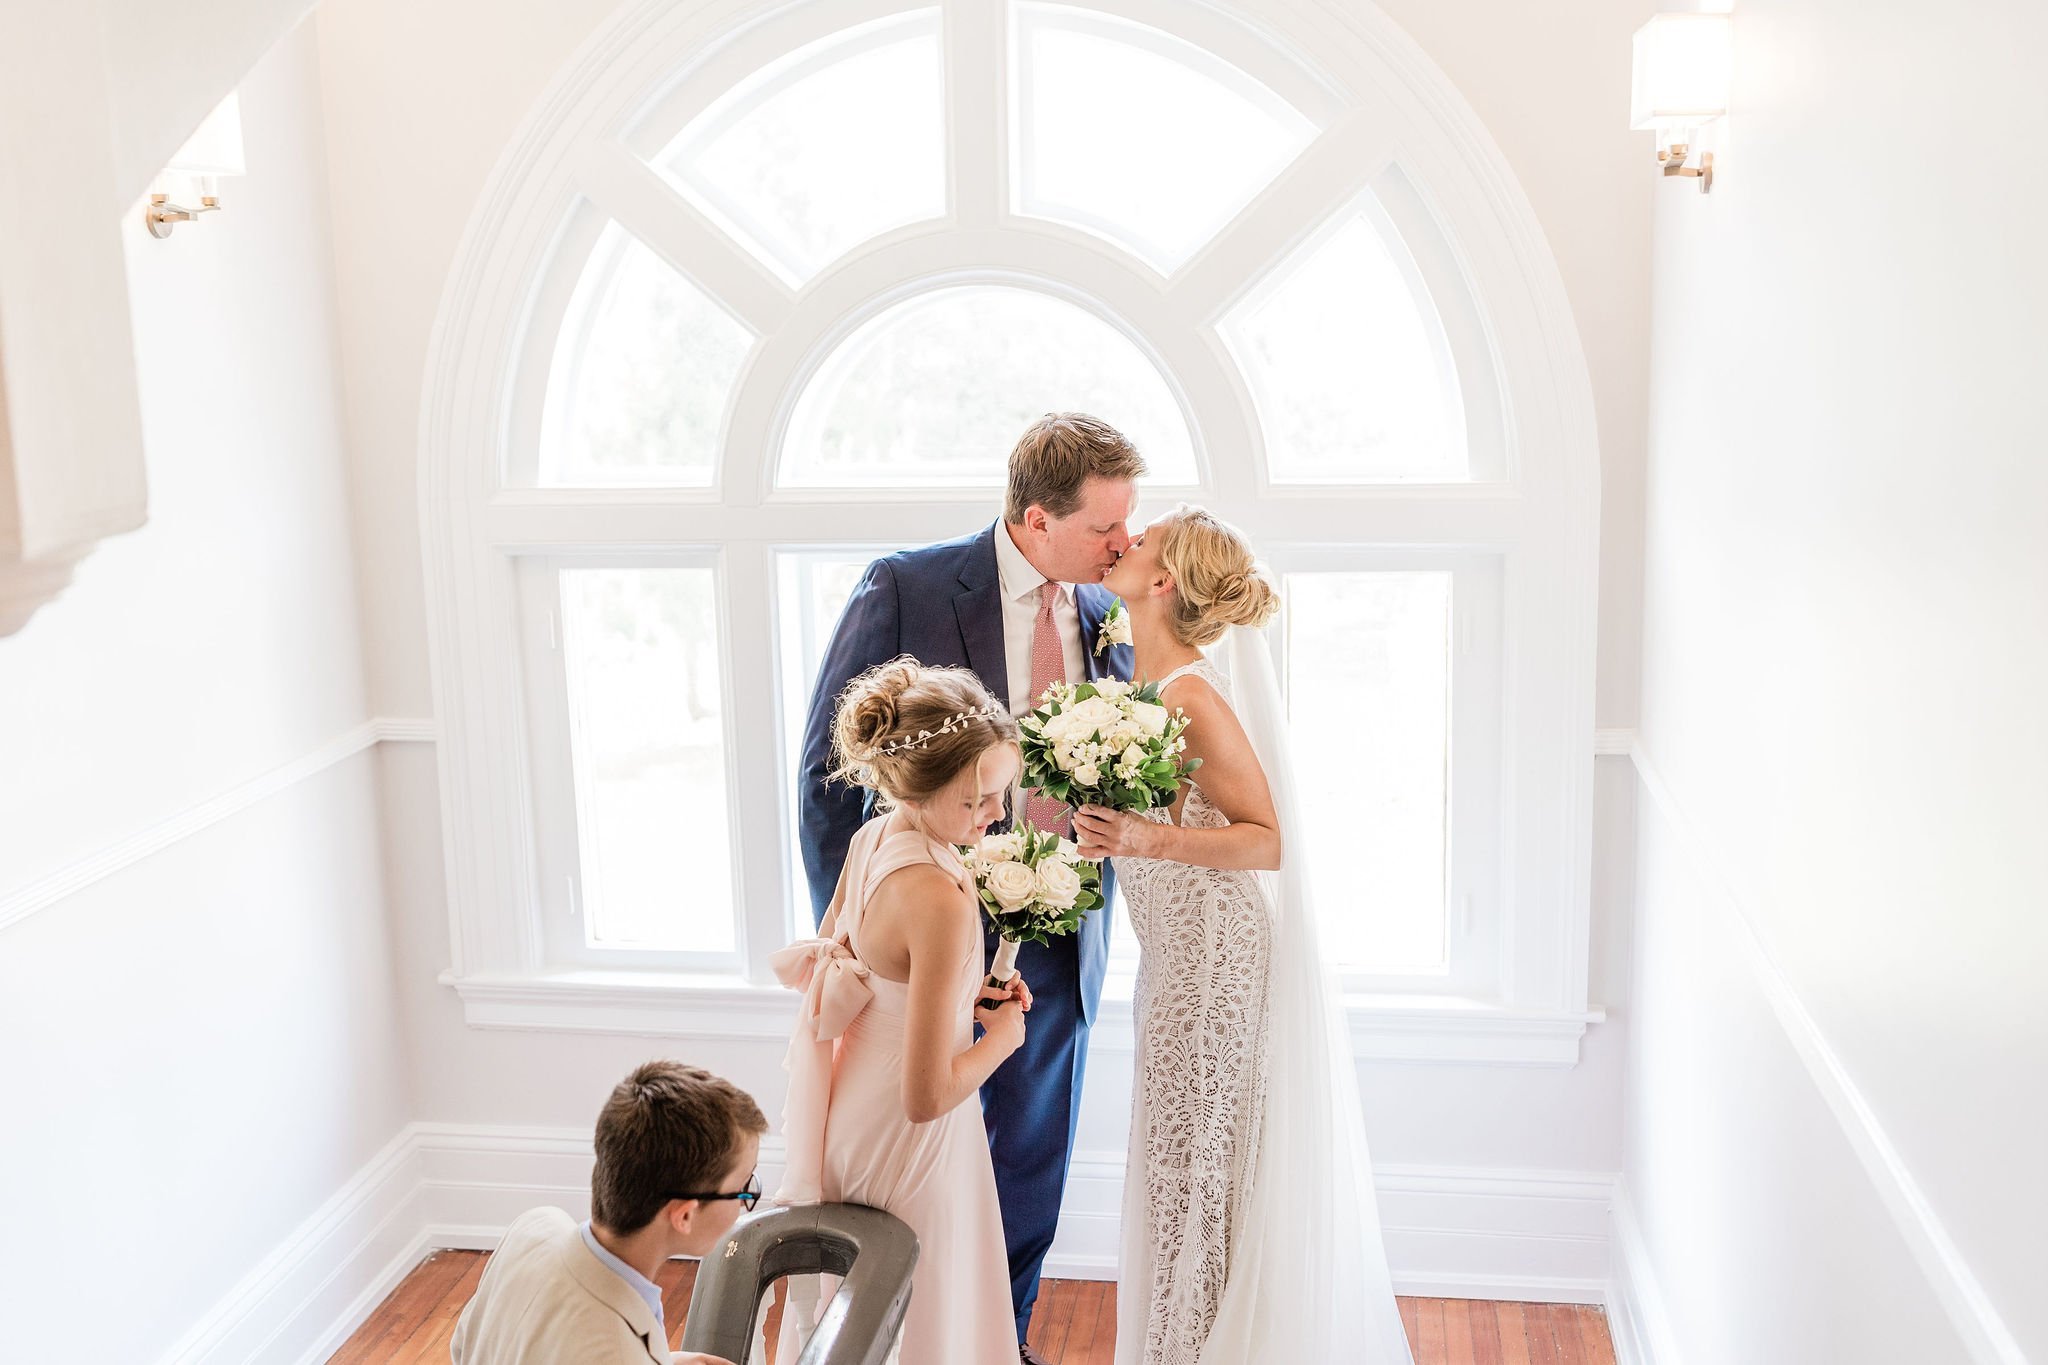 heather-and-robs-classic-elegant-southern-wedding-at-faith-chapel-and-the-jekyll-island-club-planned-by-savannah-wedding-planner-and-florist-ivory-and-beau-6.jpg